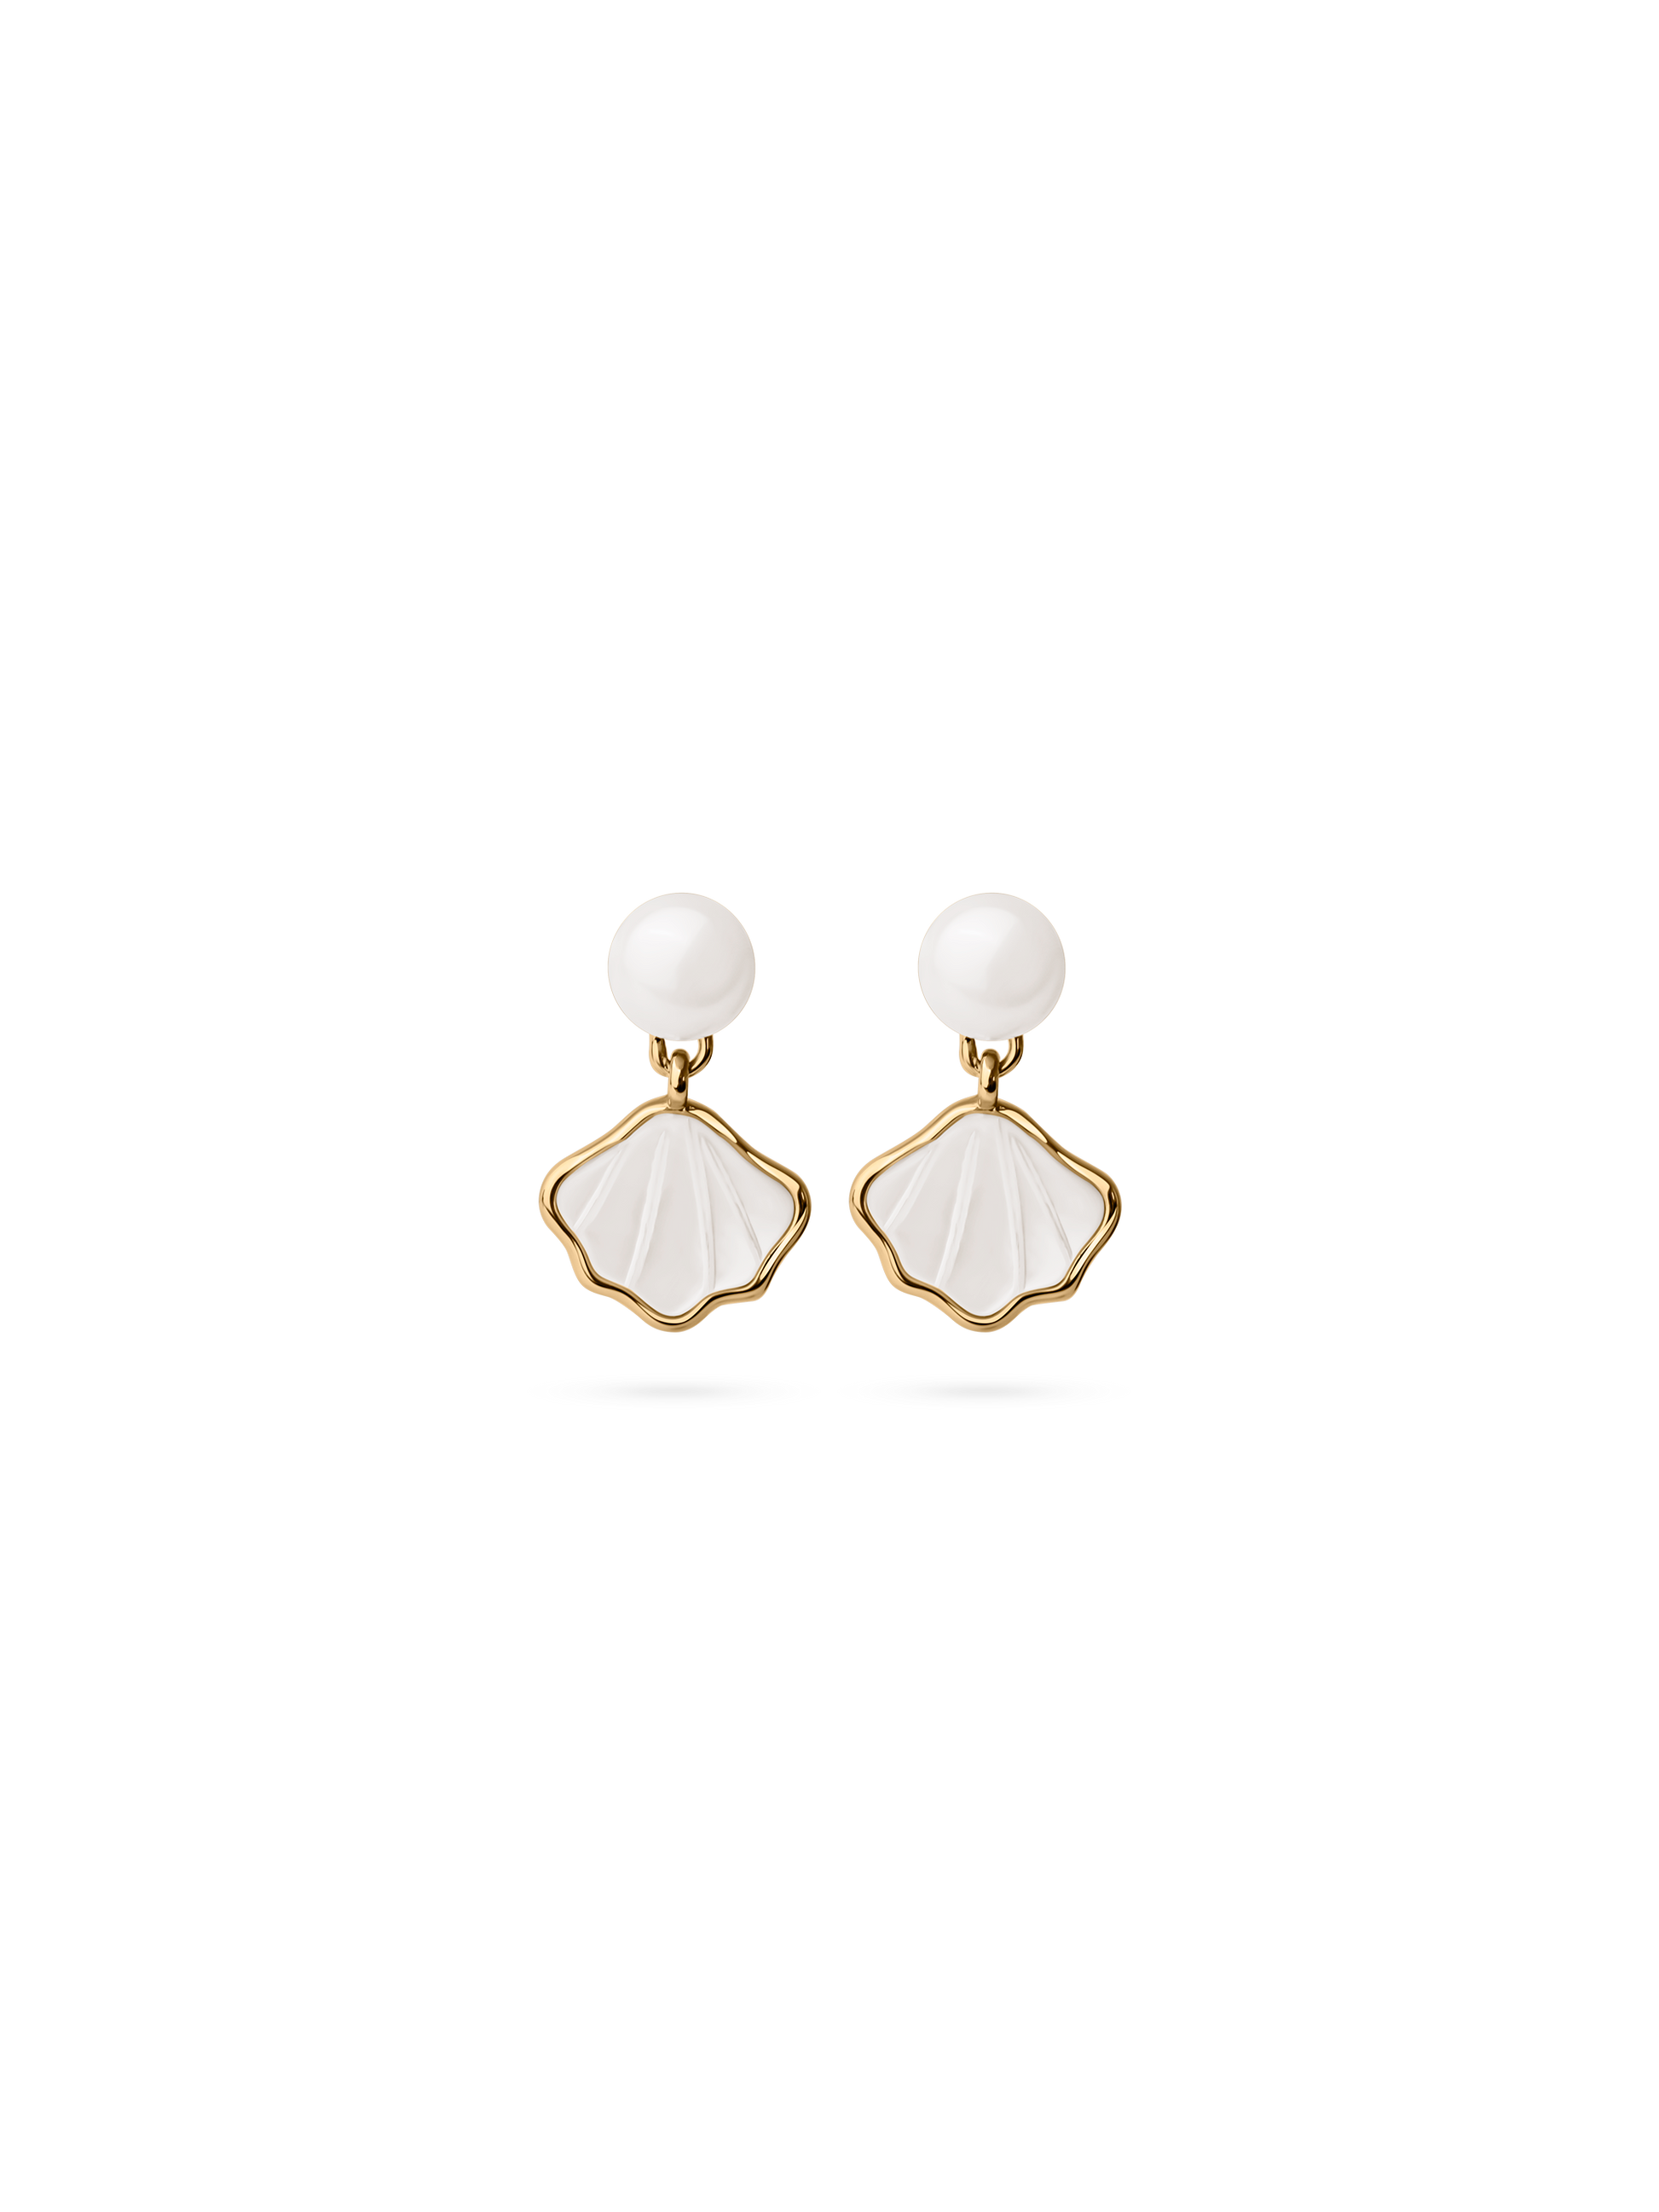 corsica pearl earring 18k gold plated brass